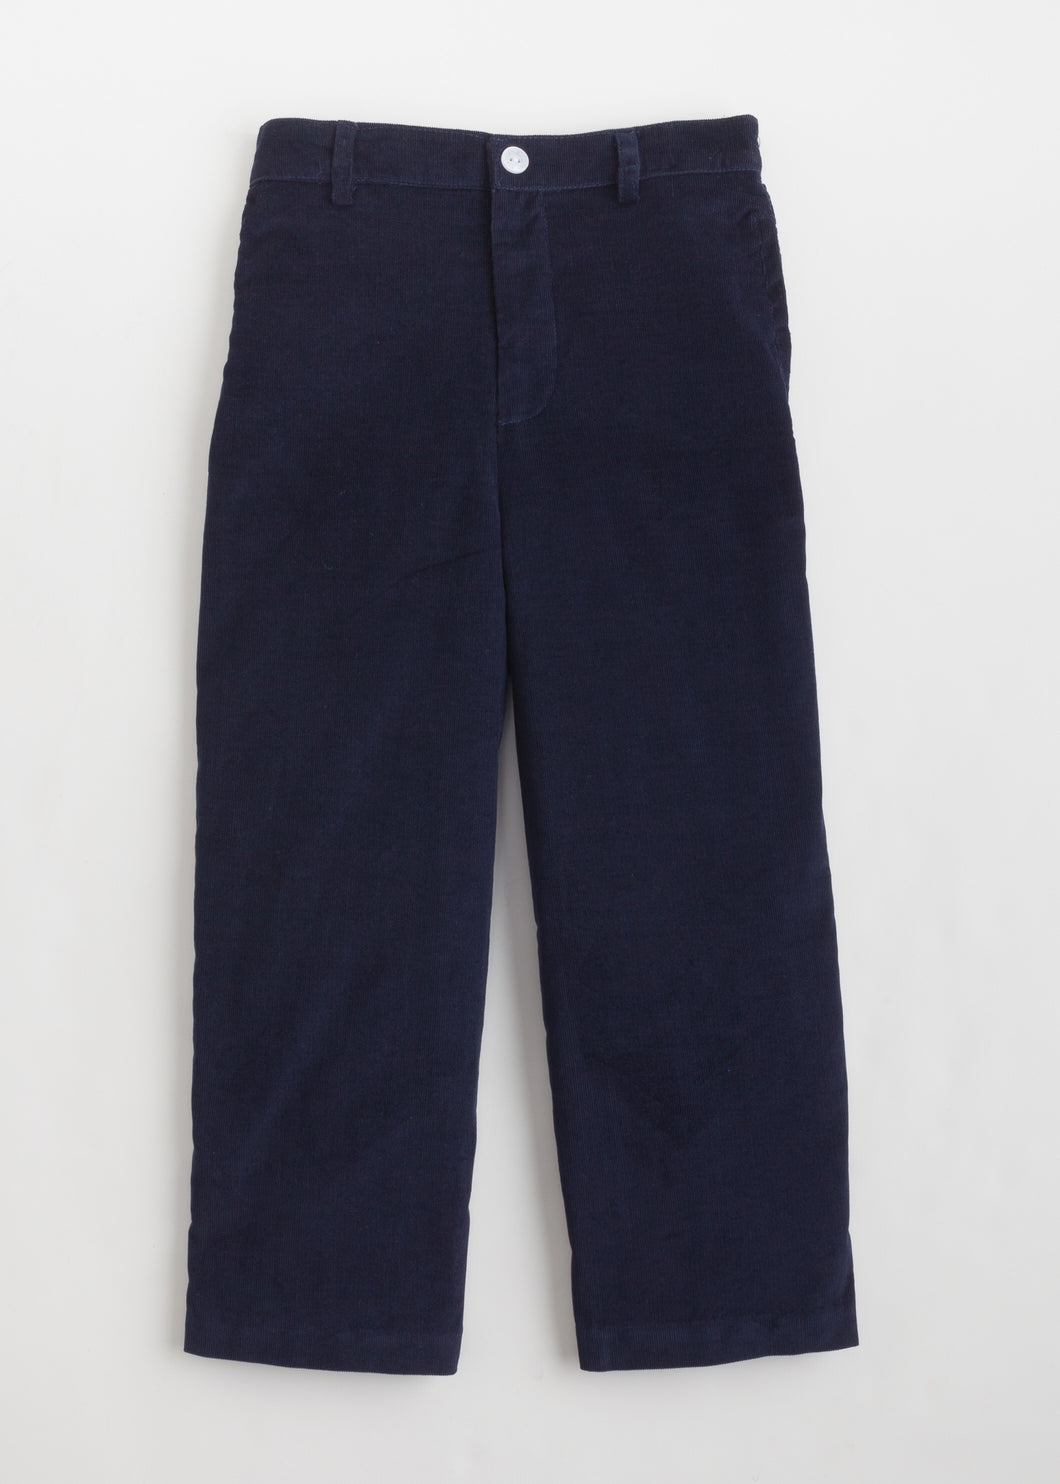 Pull On Pant - Navy Corduroy